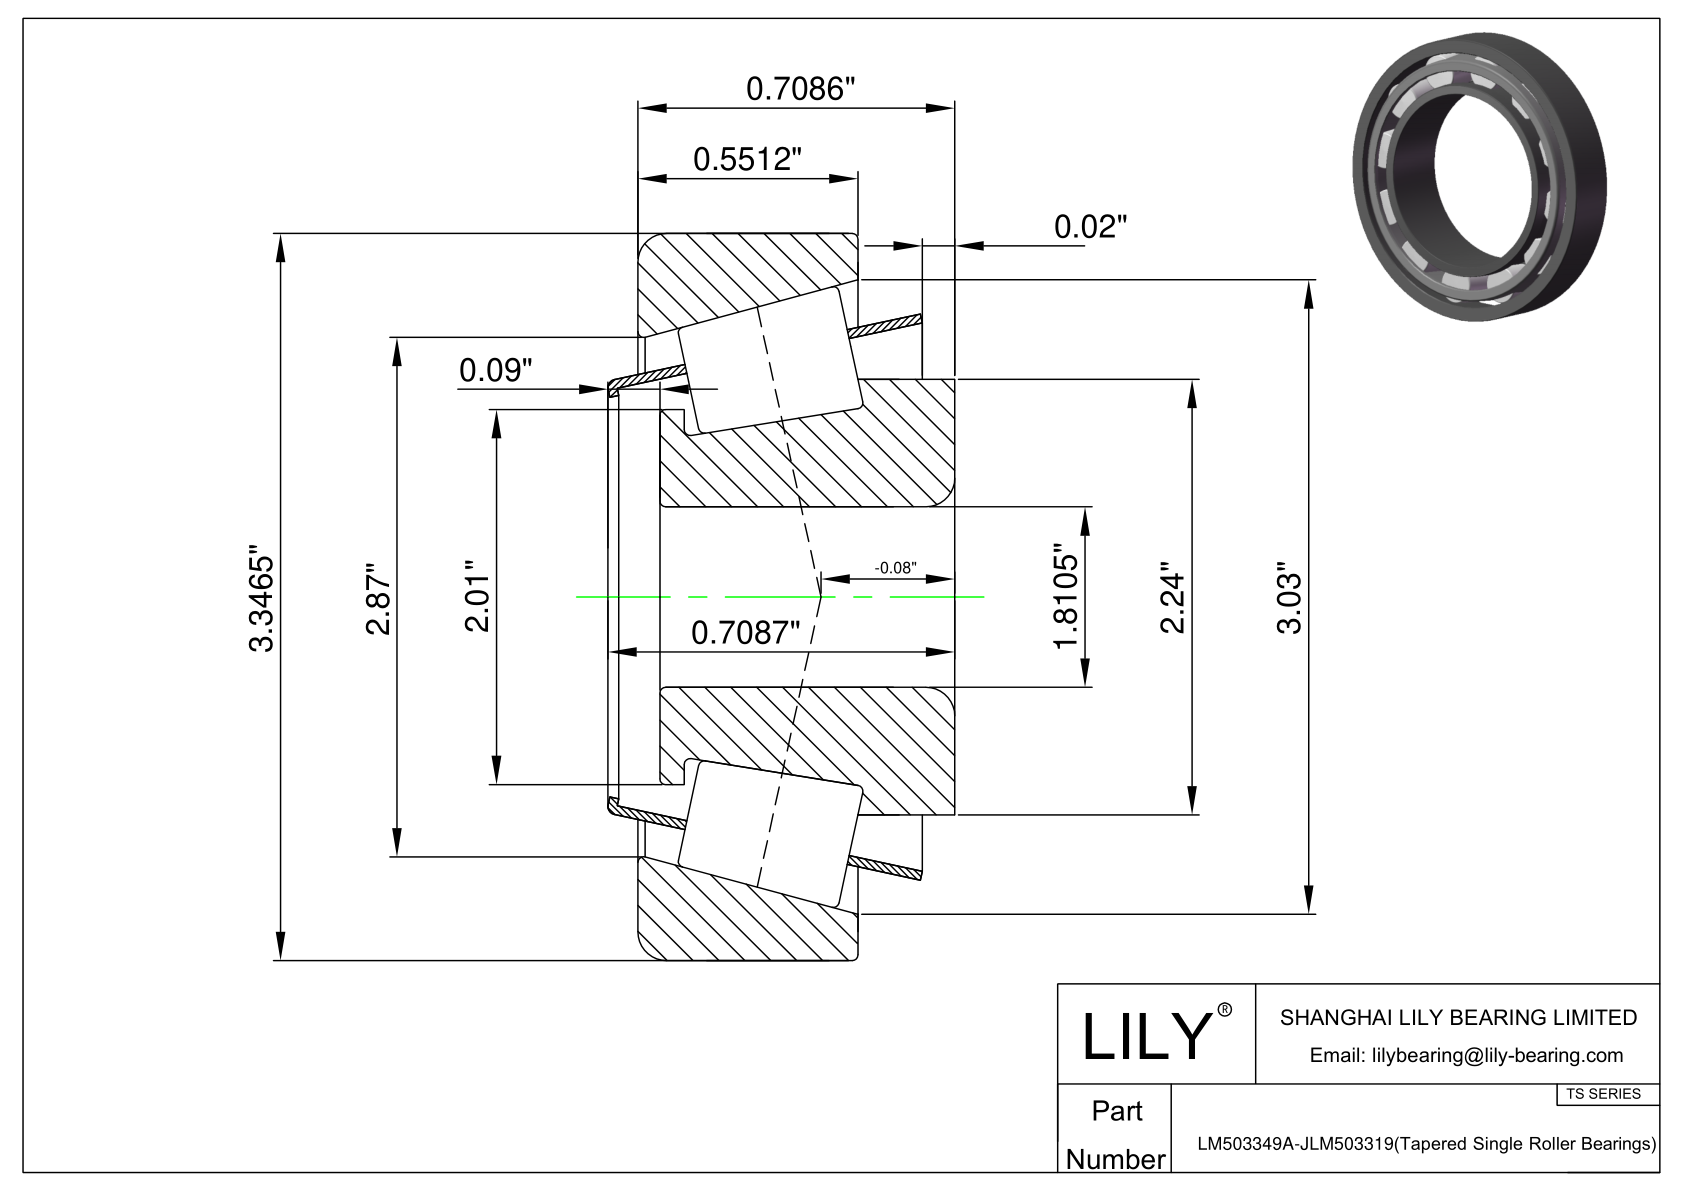 LM503349A-JLM503319 TS (Tapered Single Roller Bearings) (Imperial) cad drawing